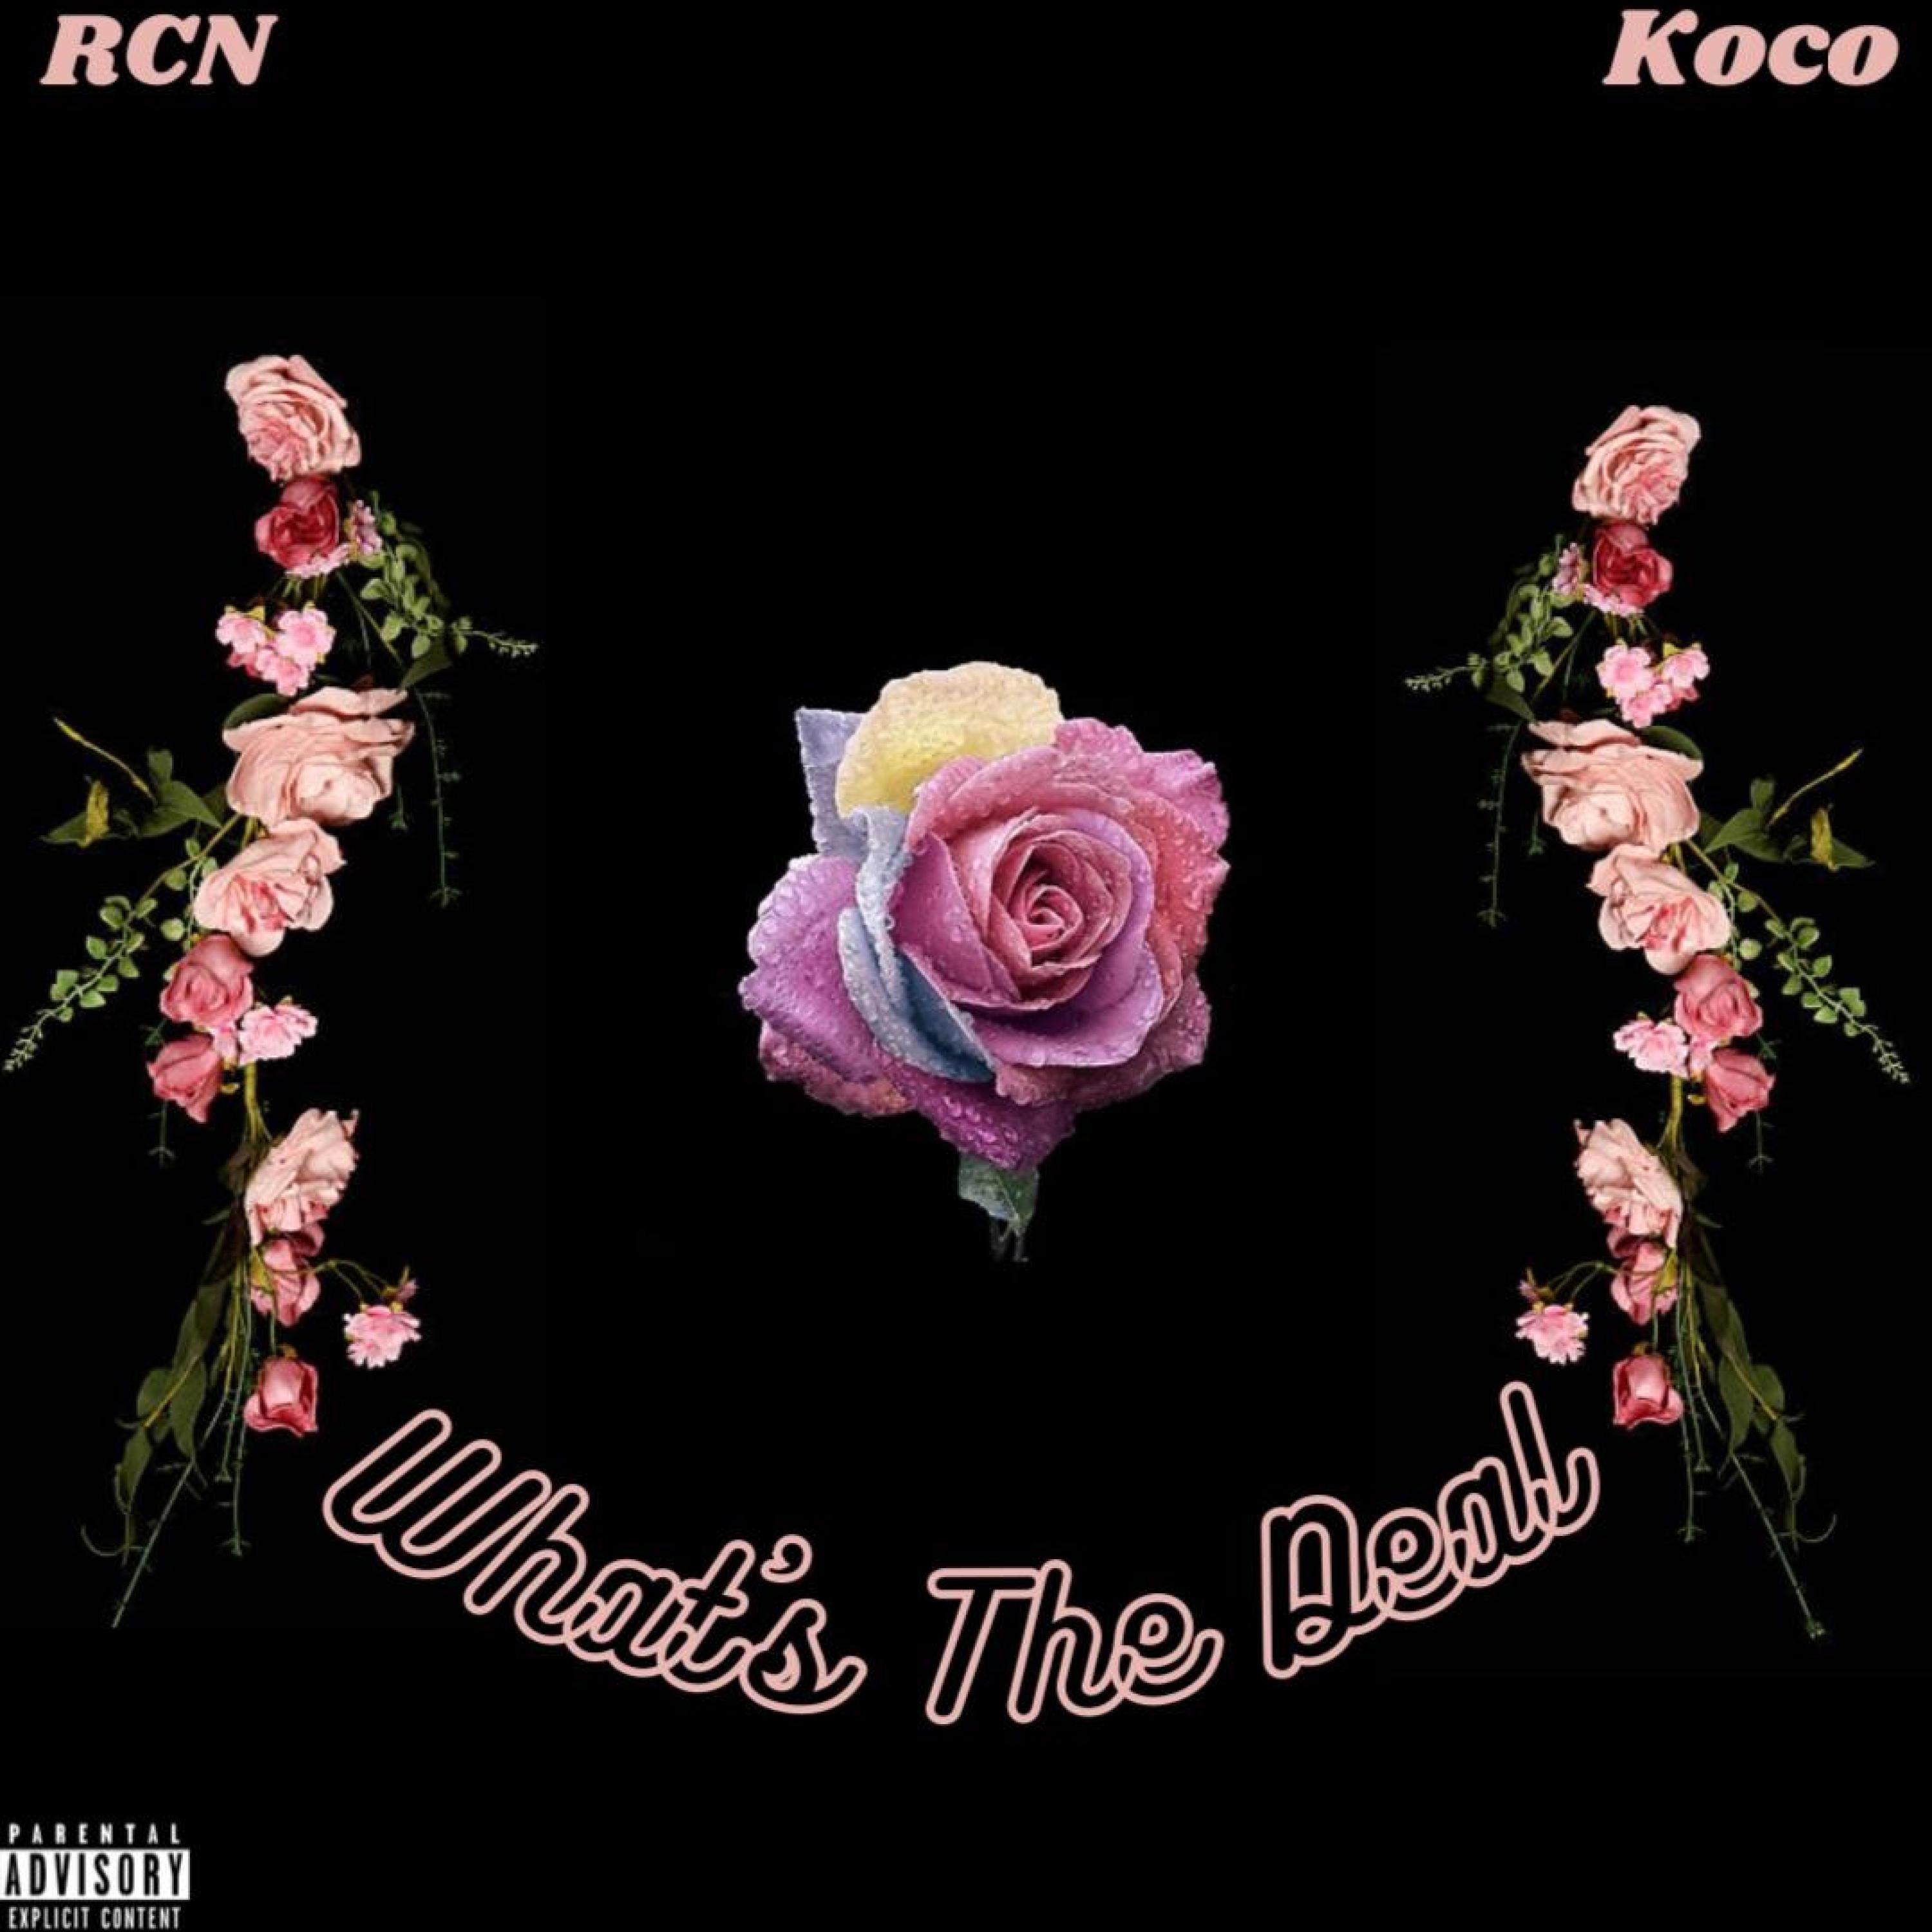 Koco - WHATs THE DEAL